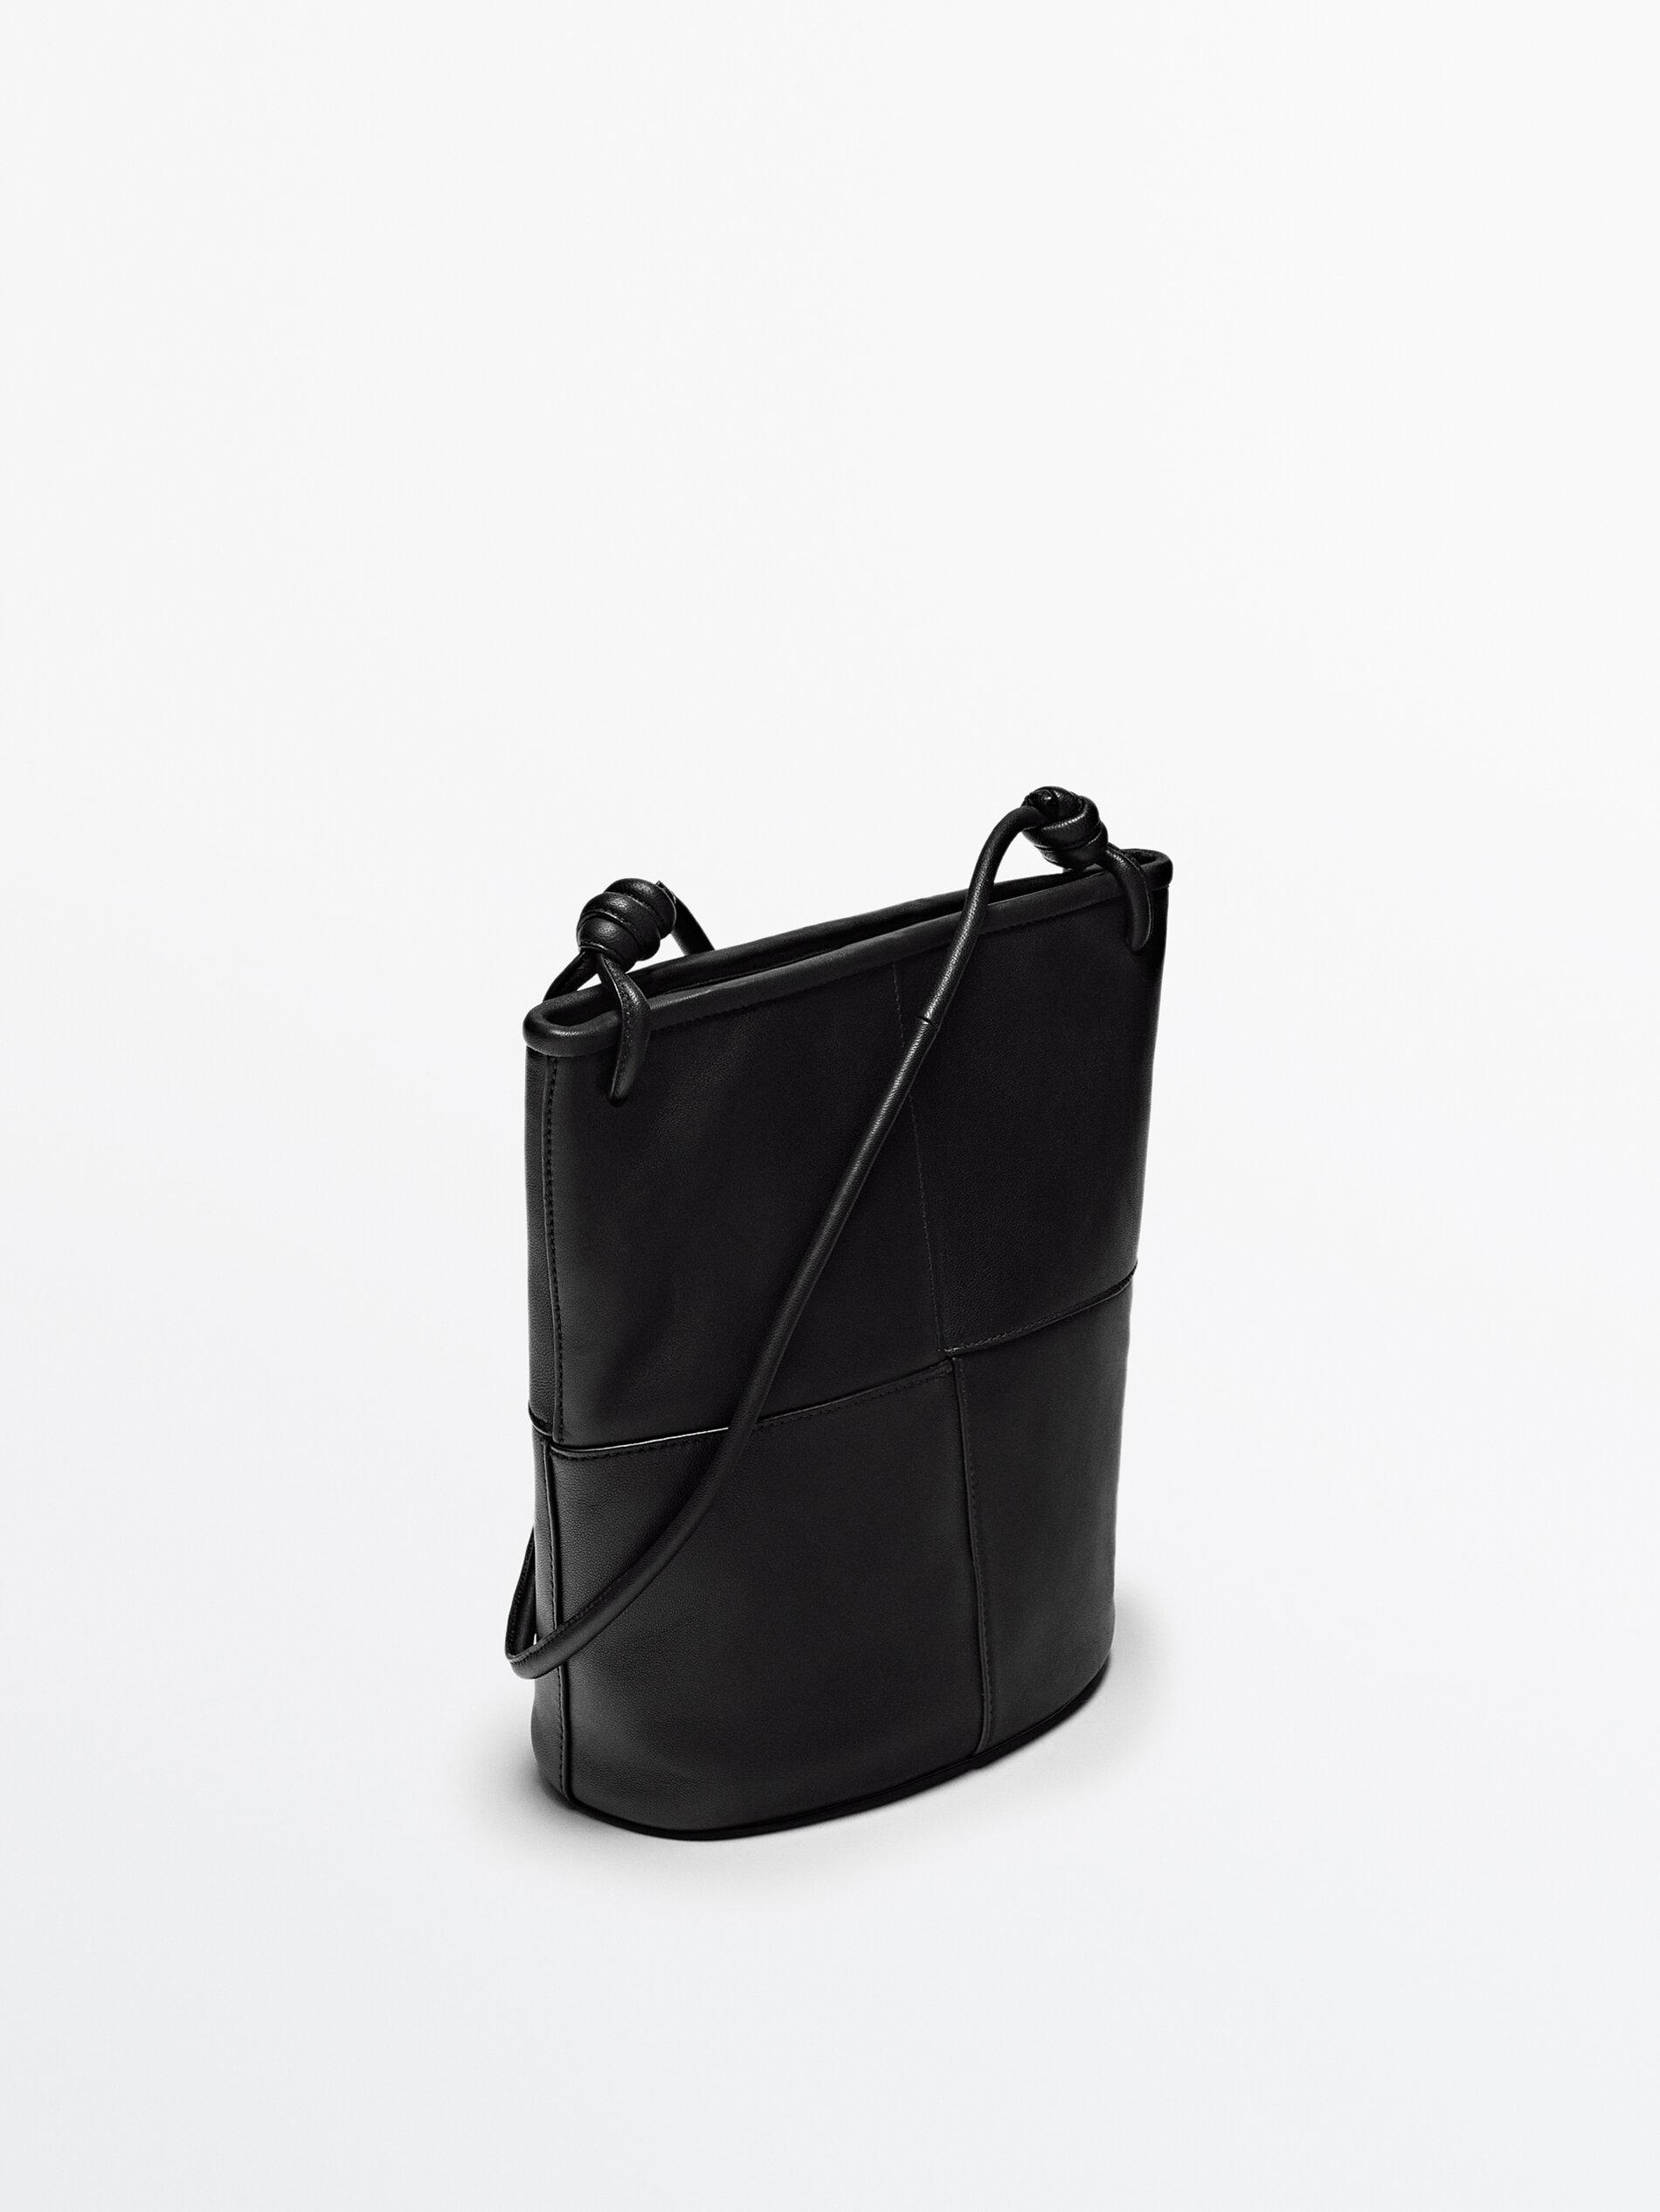 MASSIMO DUTTI Nappa Leather Bucket Bag With Seam Details in Black | Lyst